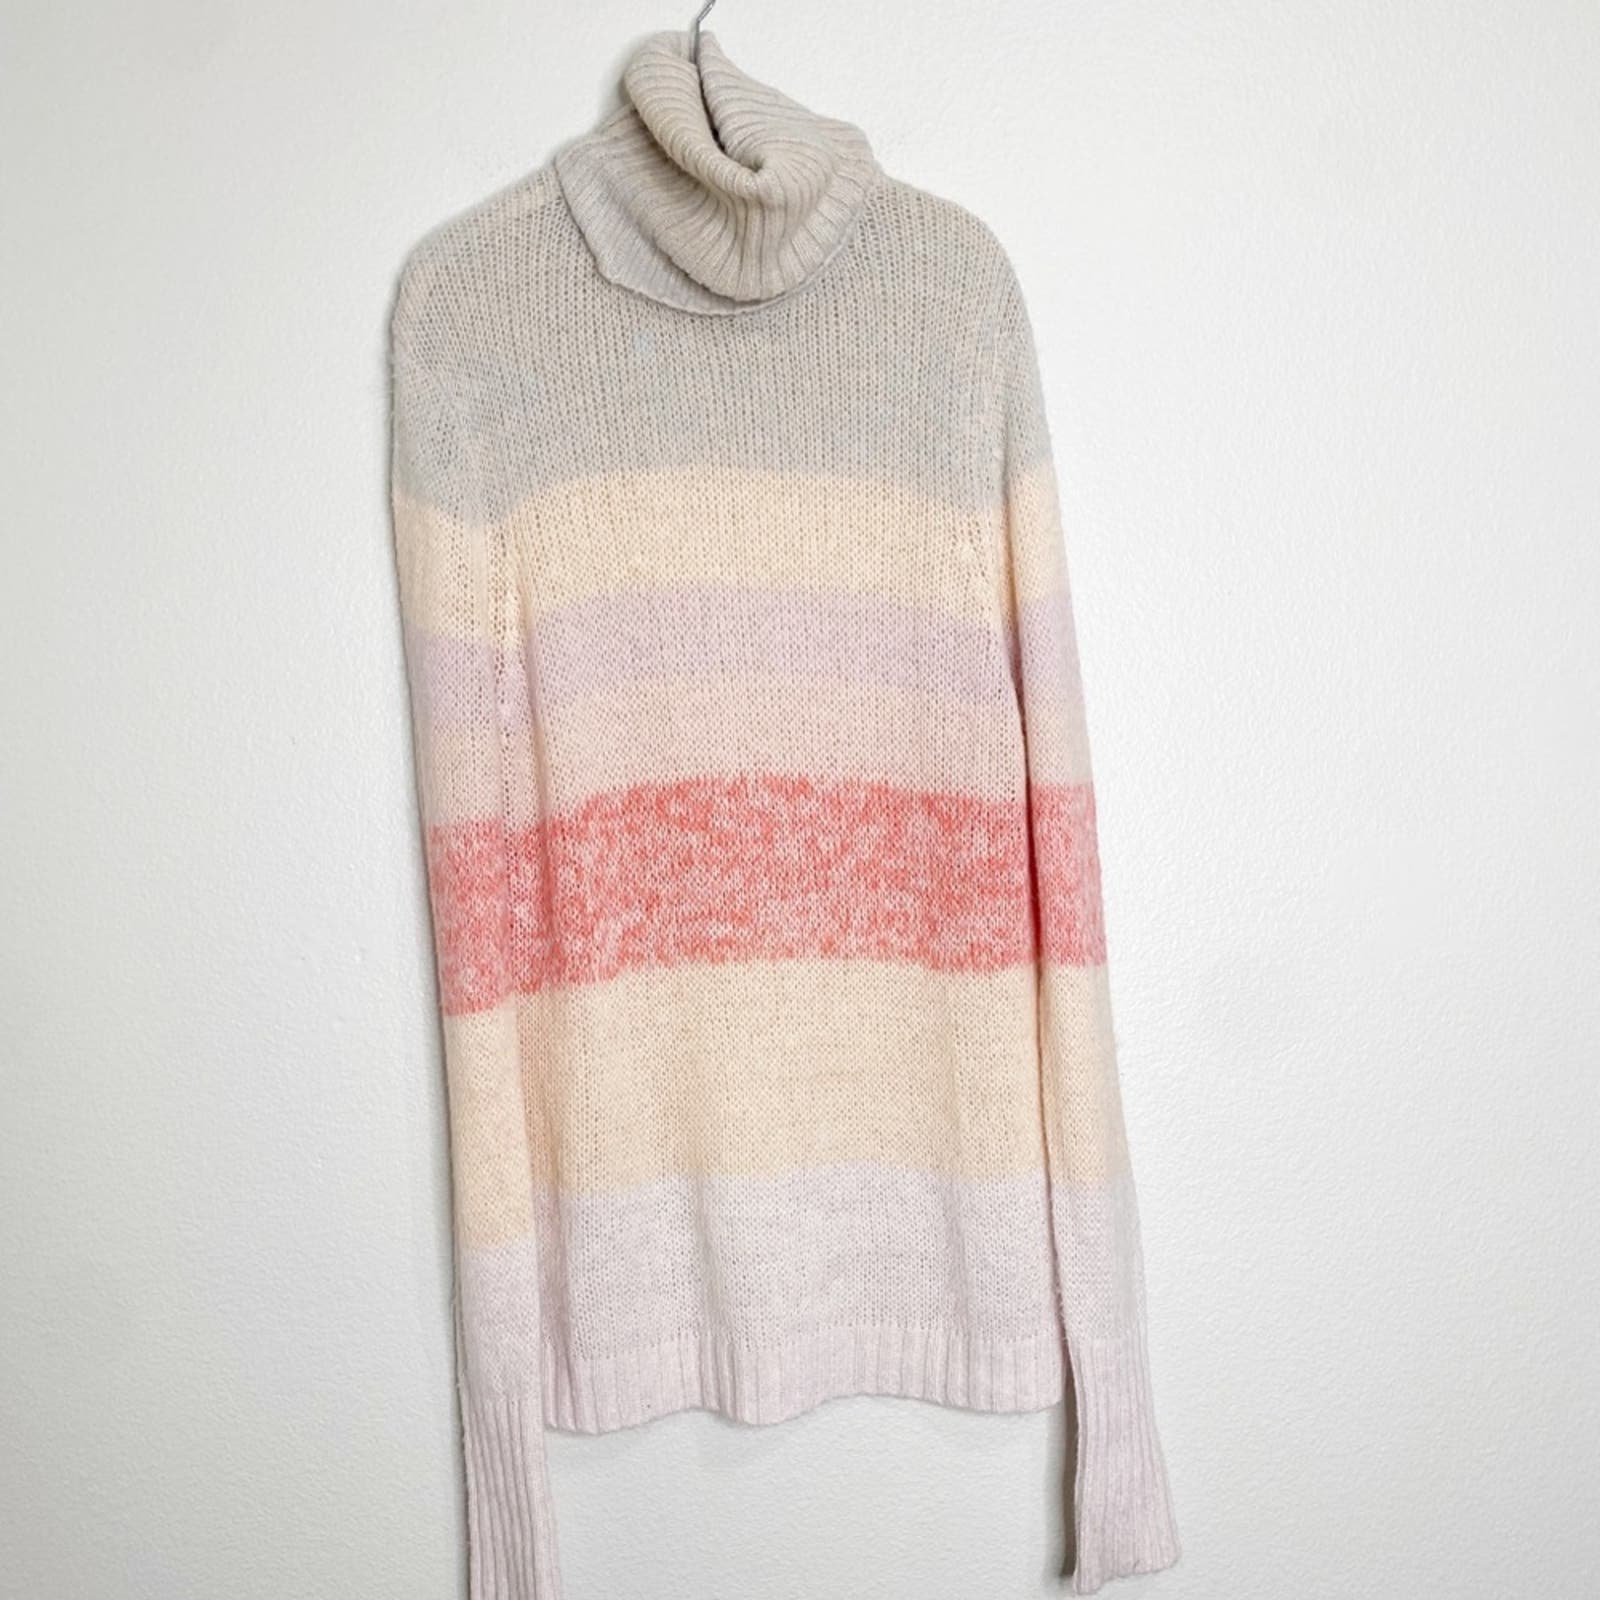 Factory Direct  wildfox white label knit turtleneck swe